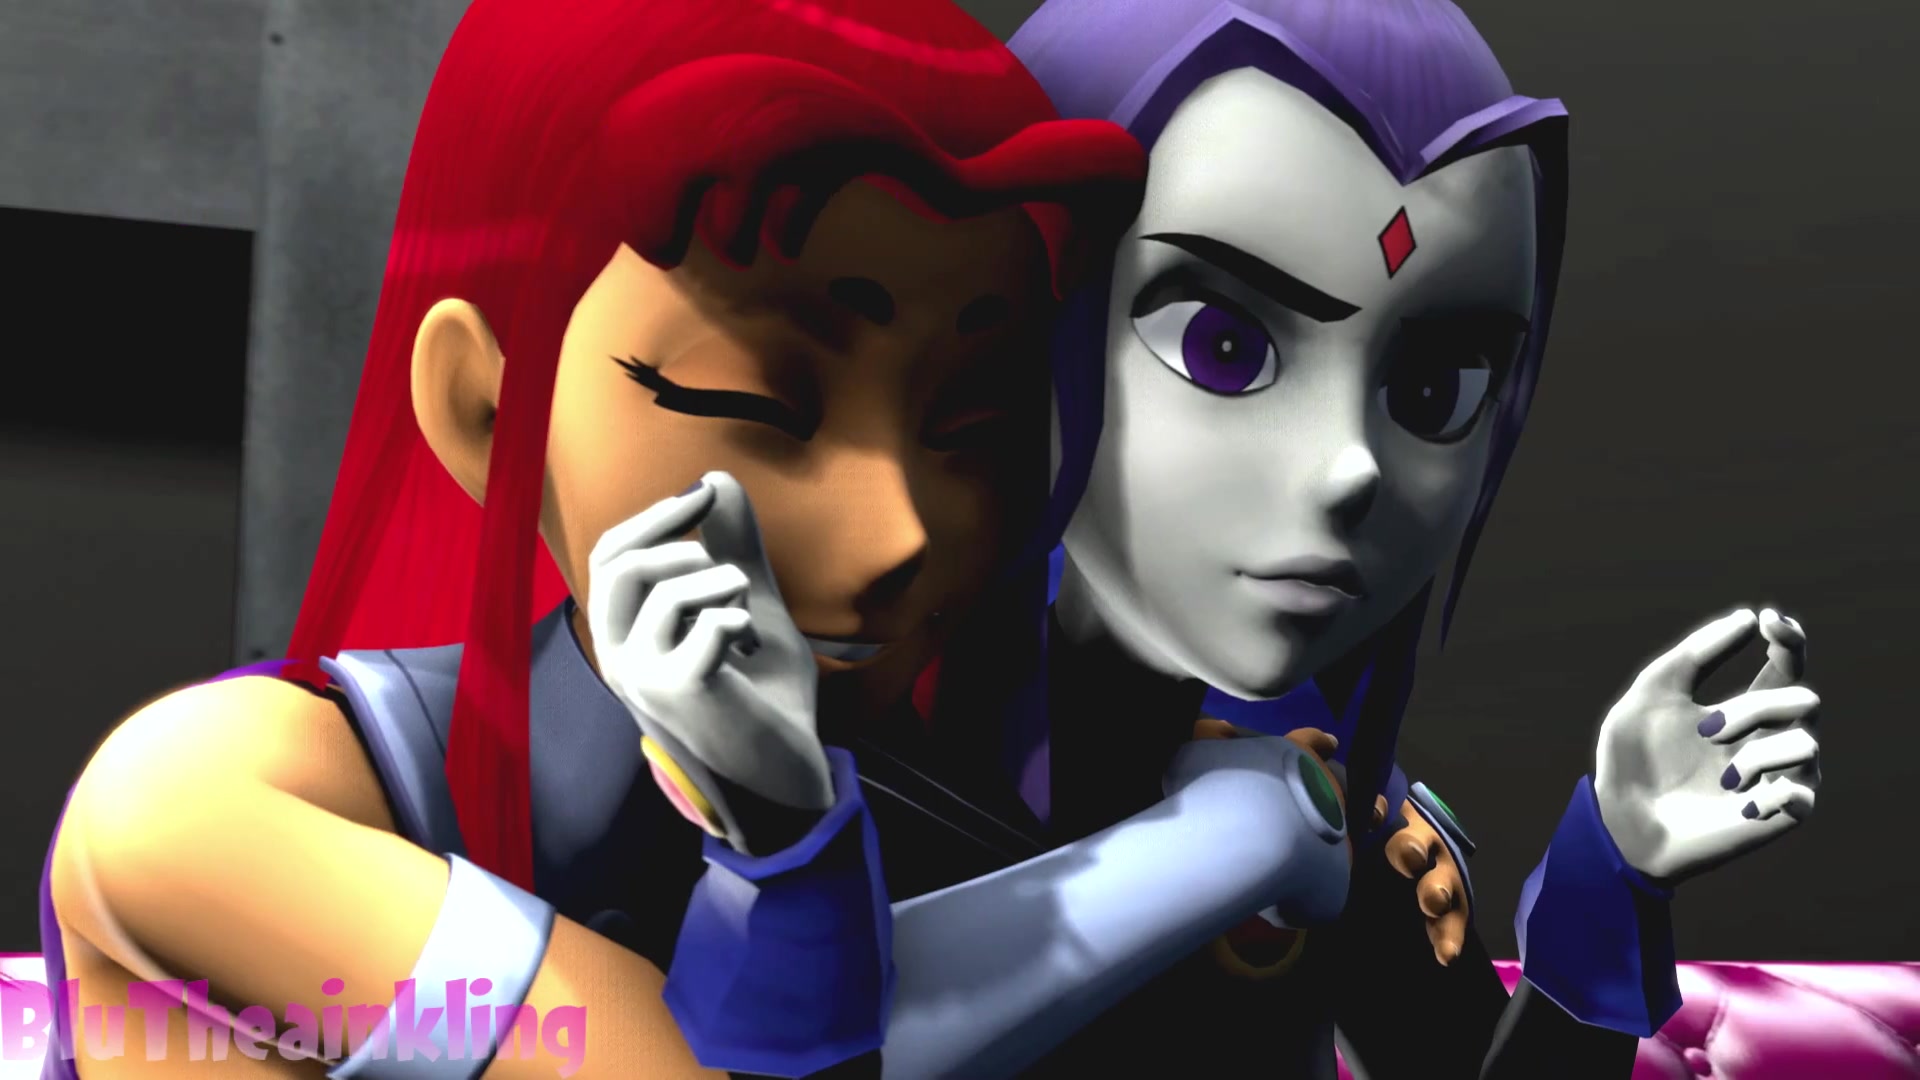 Sexy Starfire And Raven - Starfire vores raven*BluTheainkling - ThisVid.com